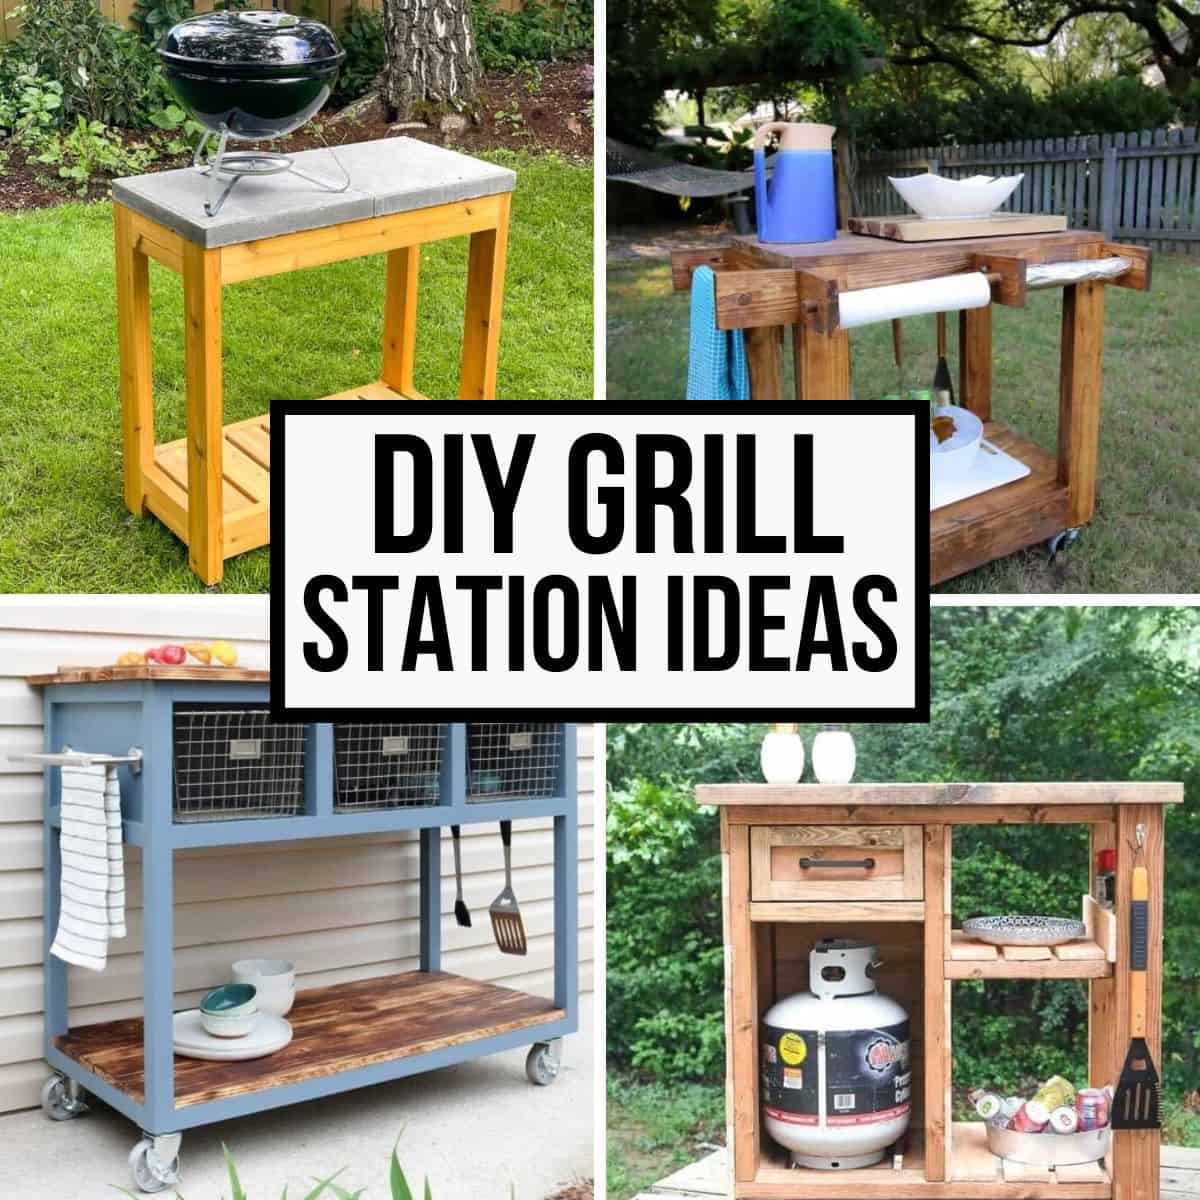 Outdoor Grill Storage: 3 Ways to Prep Your Grill for Storage